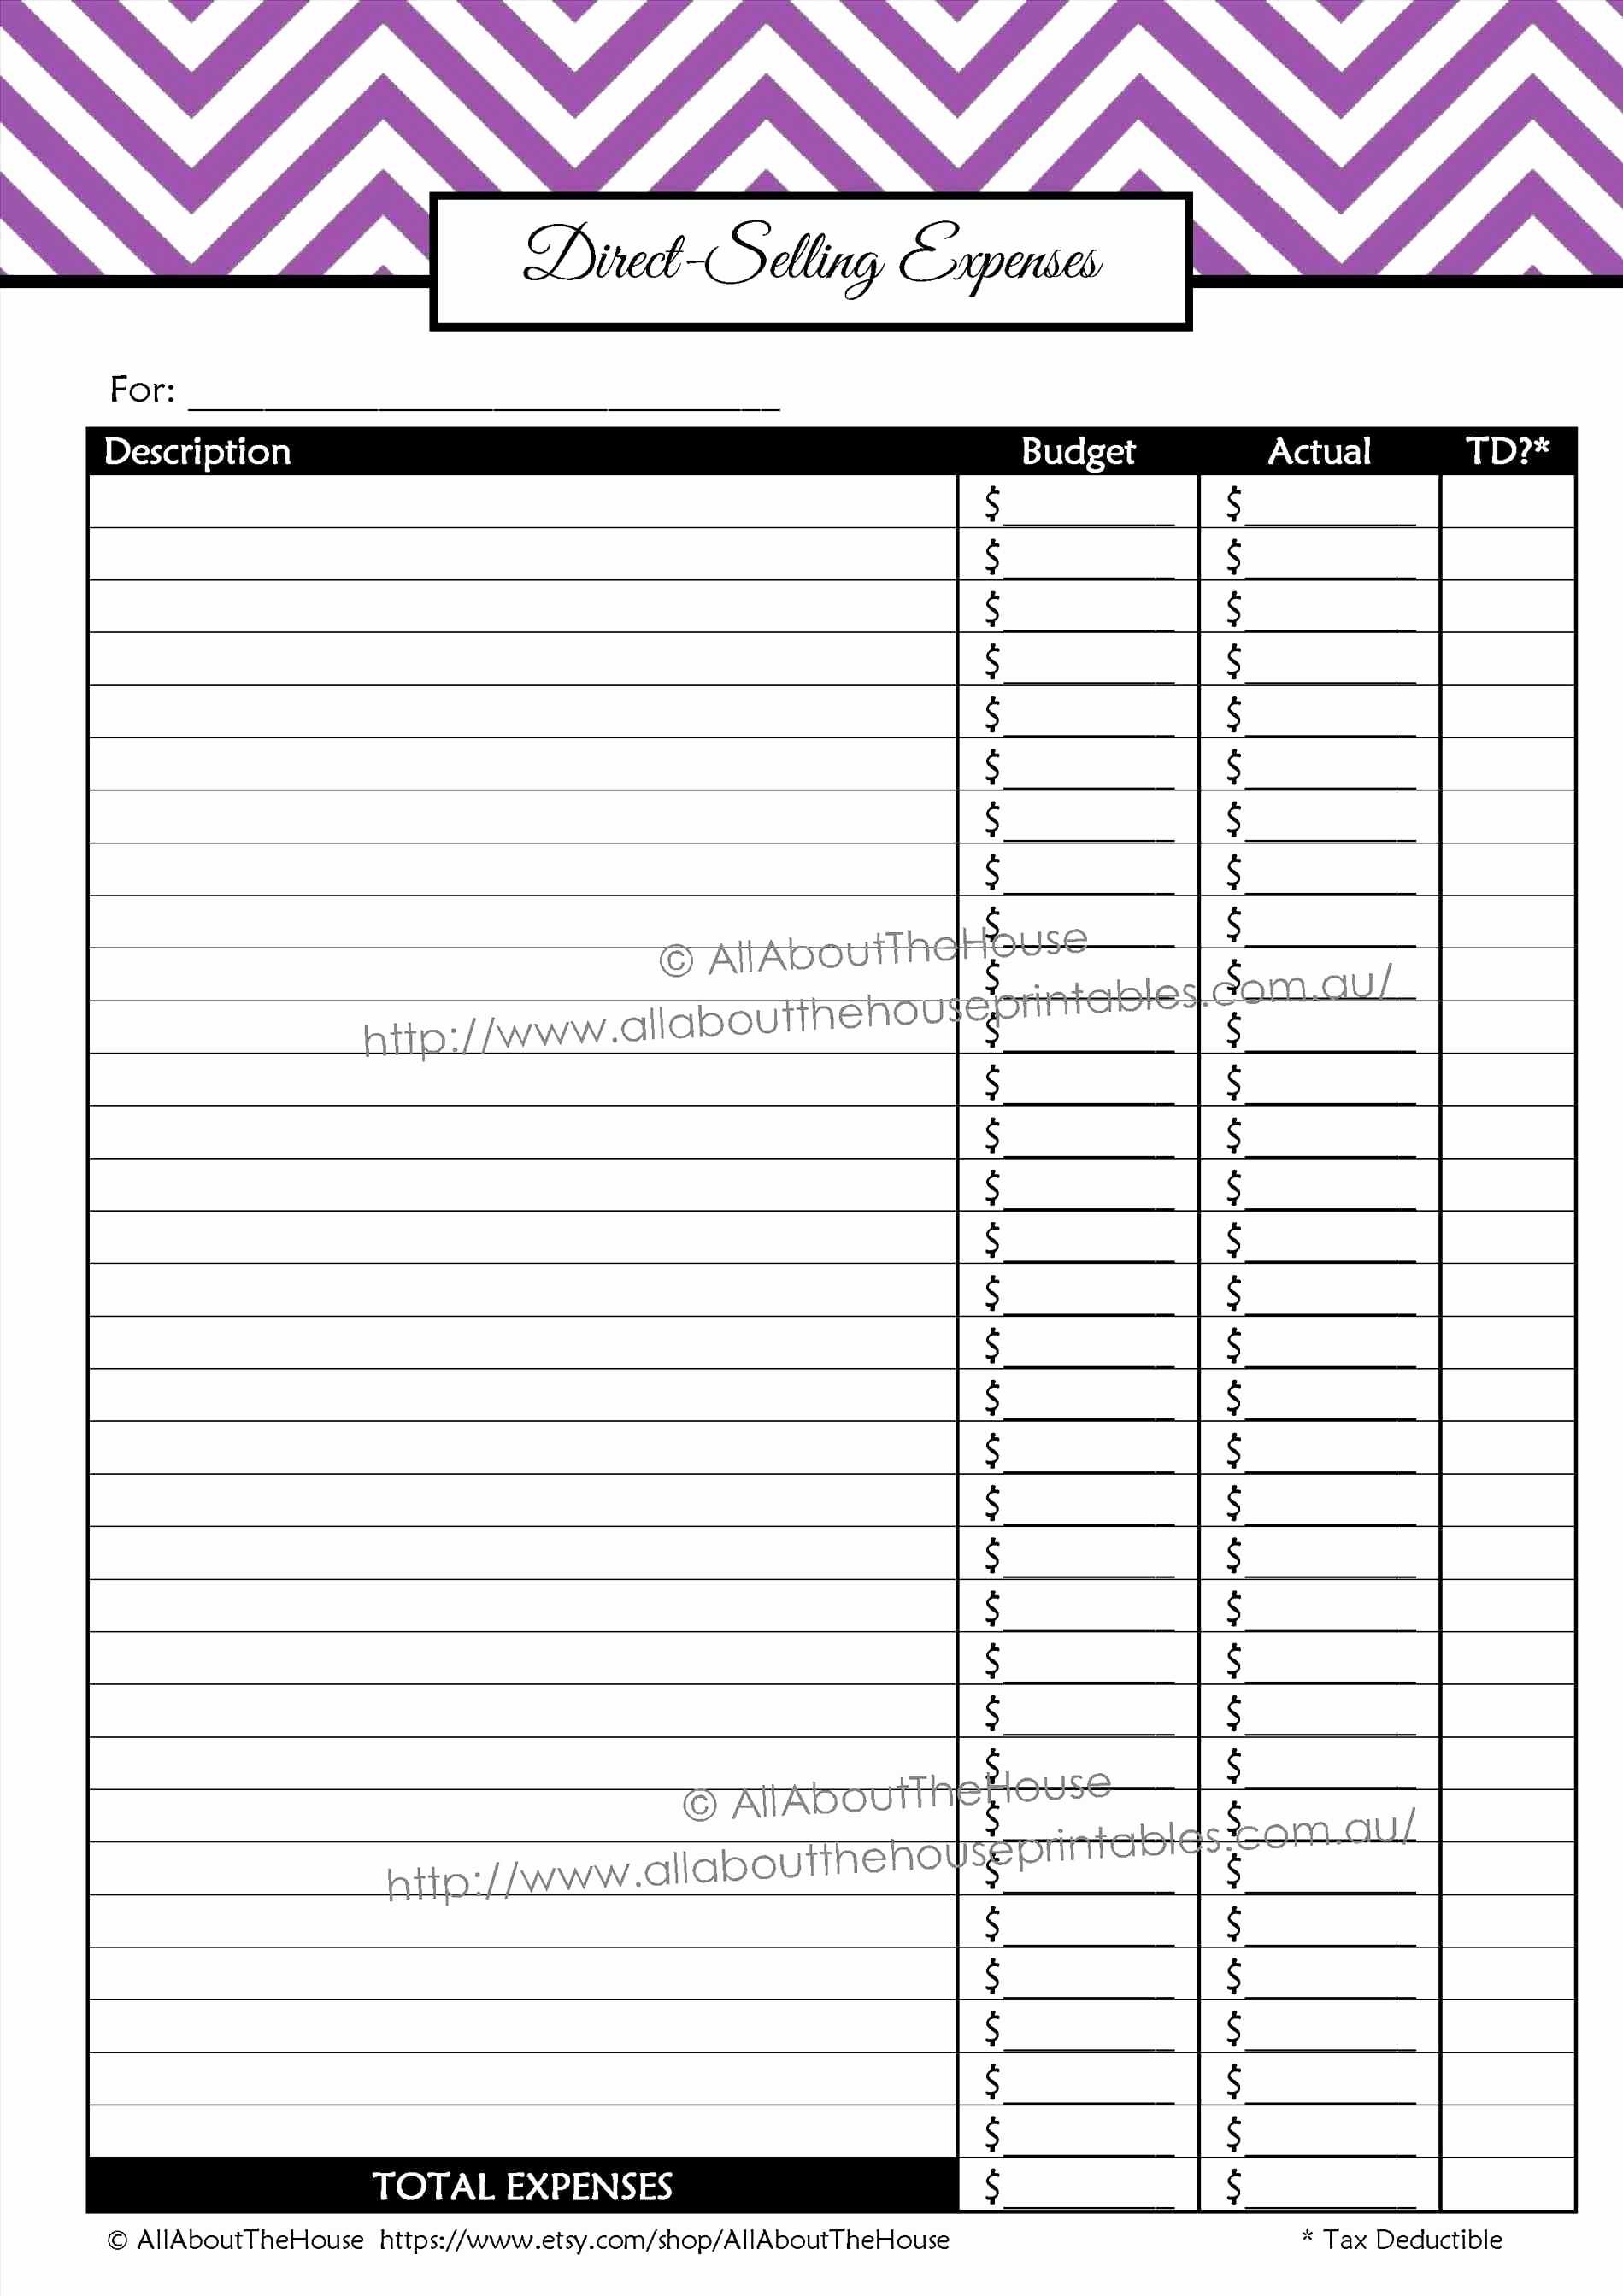 Rental Income Calculation Worksheet and Rental Expense Spreadsheet Template Jose Mulinohouse Co Property